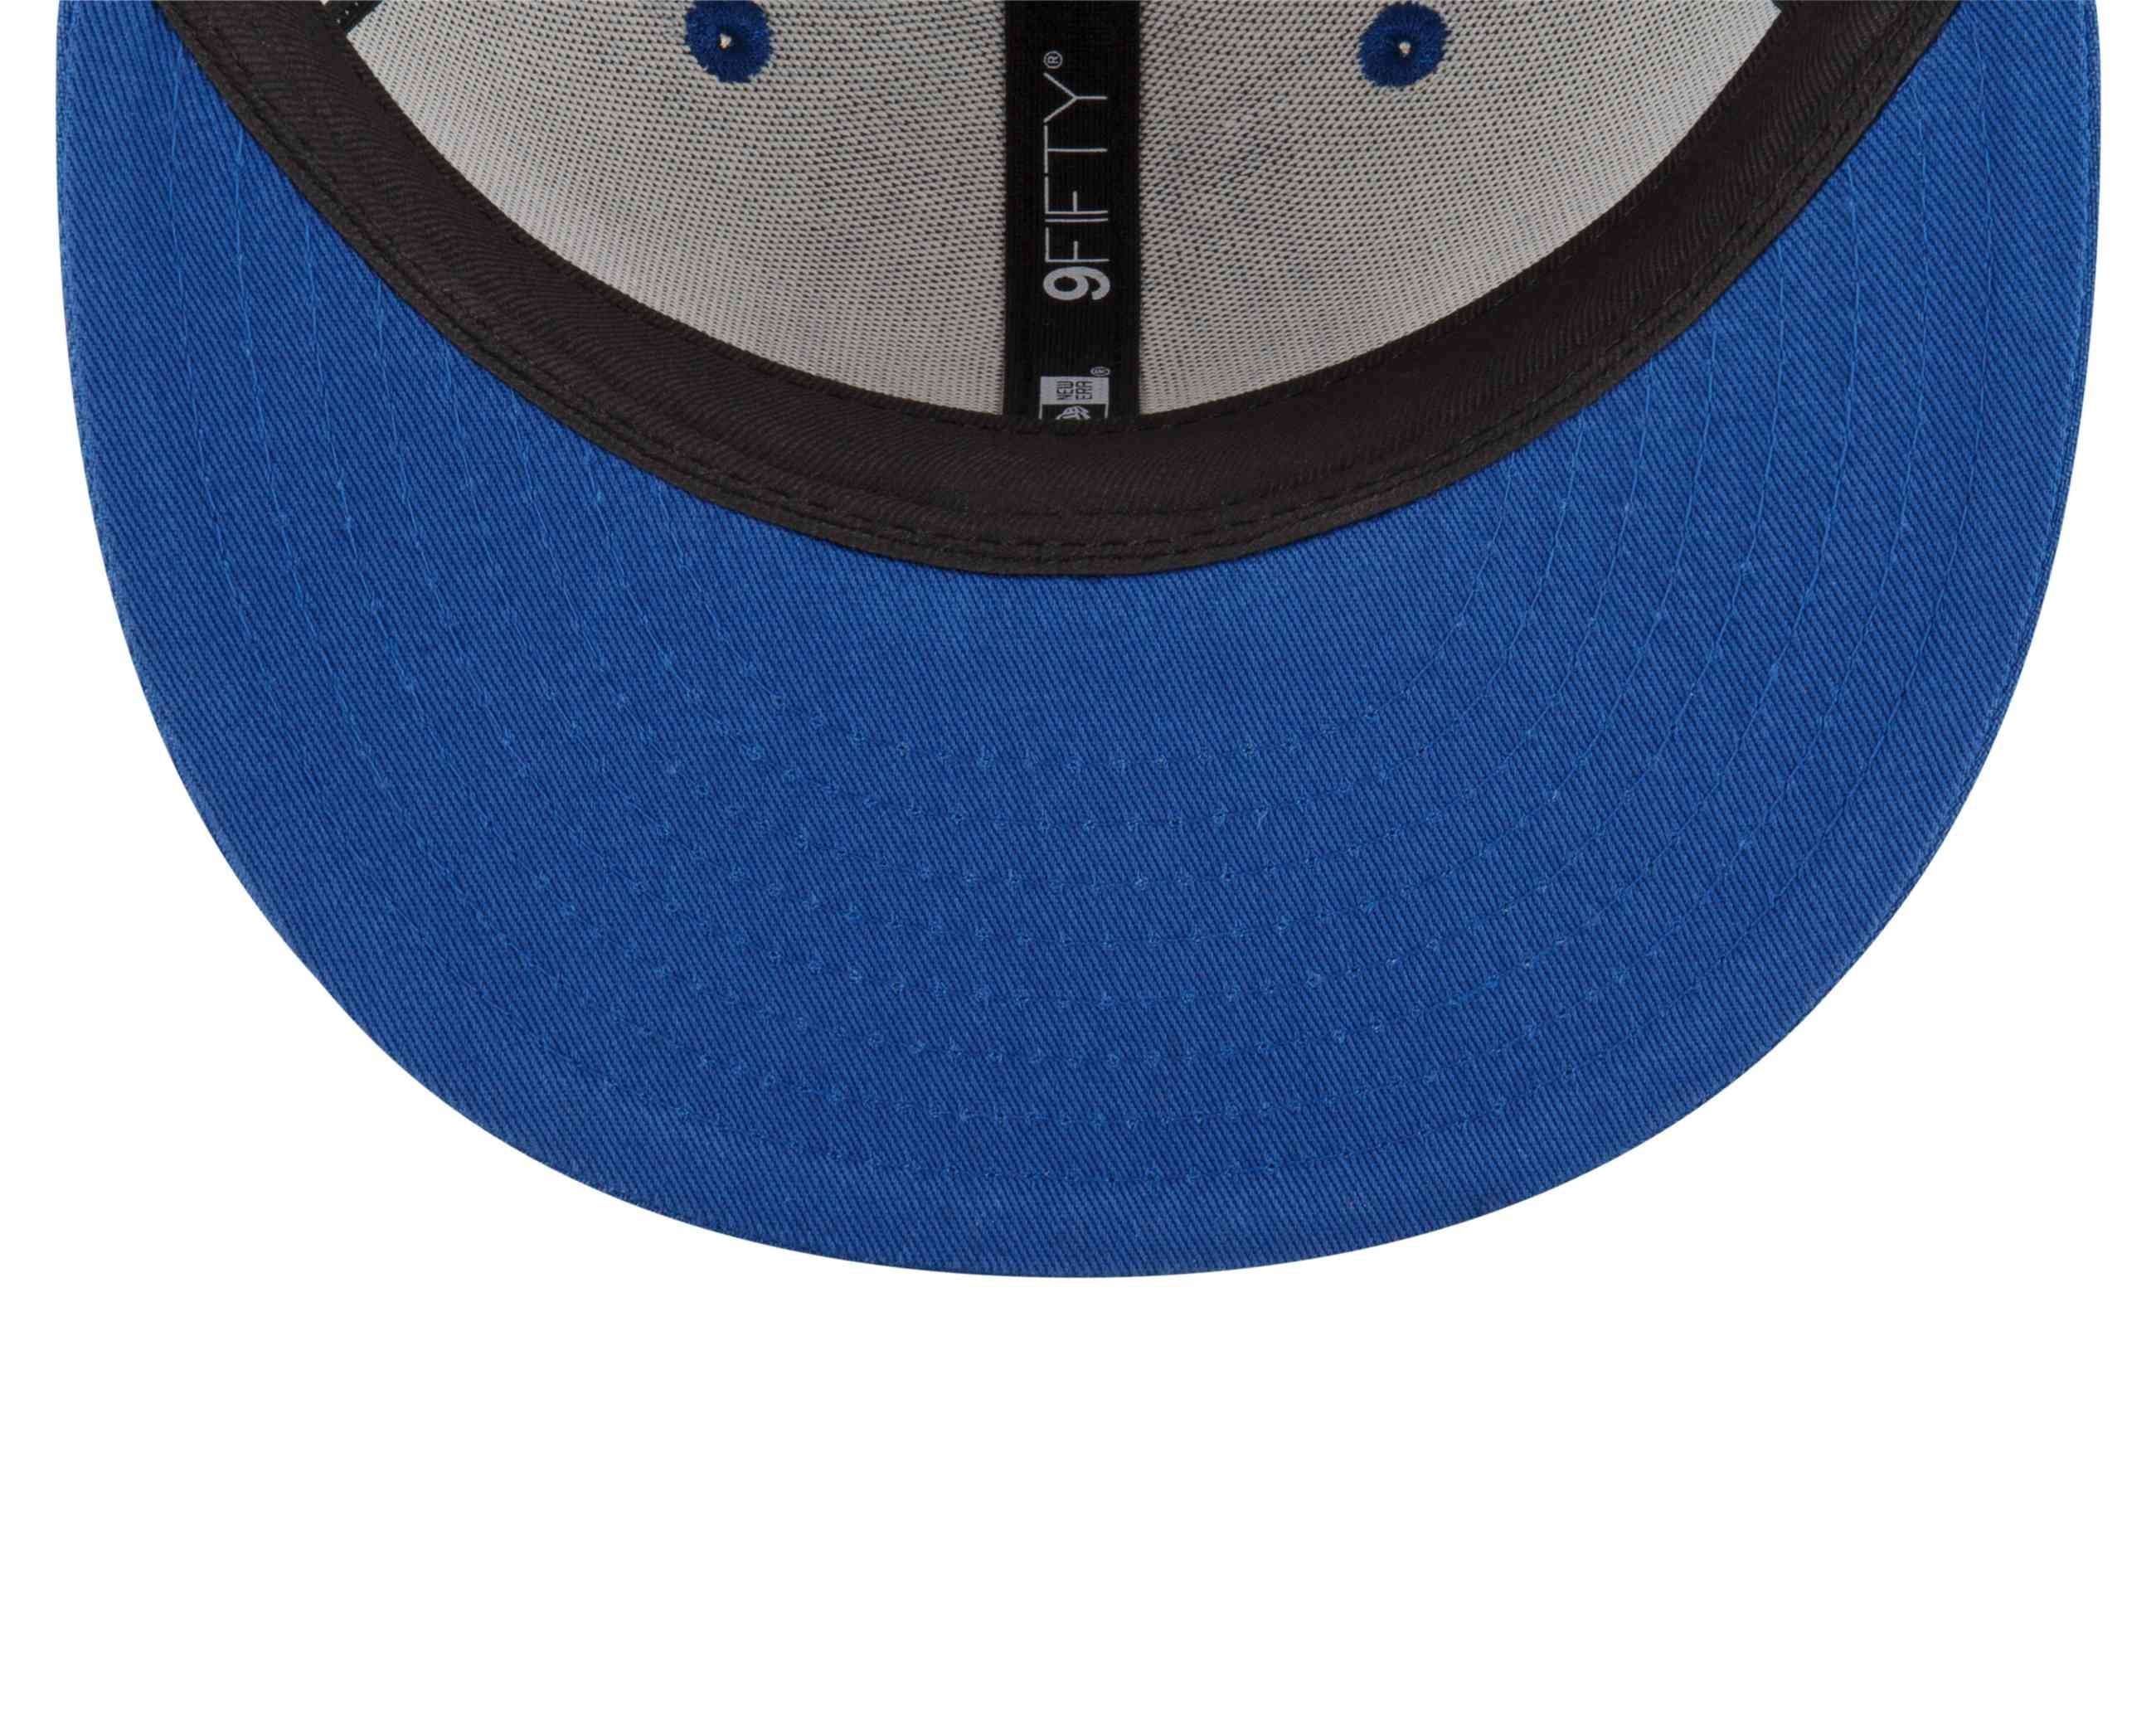 Indianapolis Ink Snapback 2022 Cap Era Sideline New 9Fifty NFL Colts